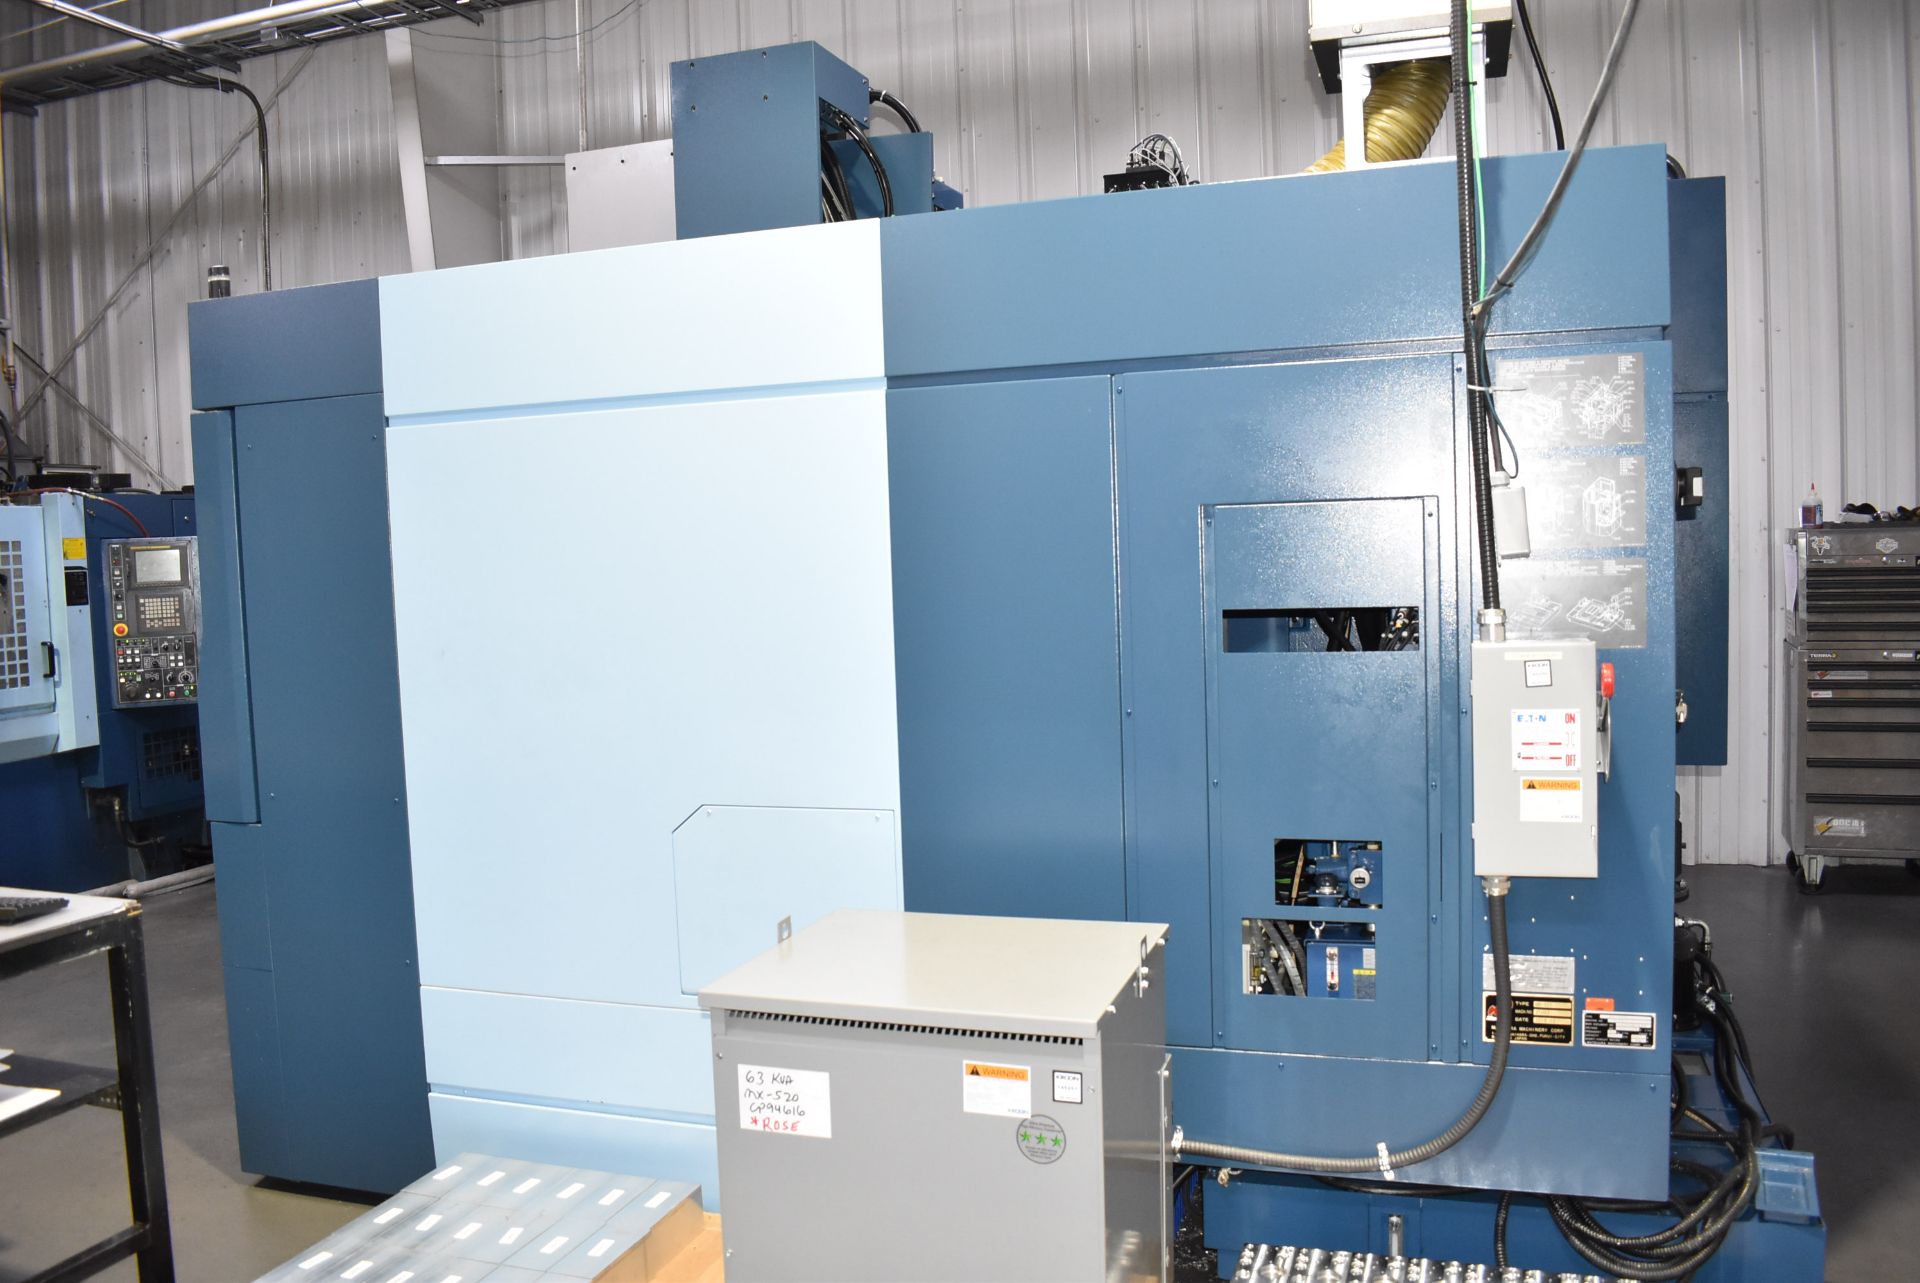 MATSUURA (2019) MX-520 PC4 MULTI-PALLET FULL 5-AXIS HIGH-SPEED CNC VERTICAL MACHINING CENTER WITH - Image 5 of 12